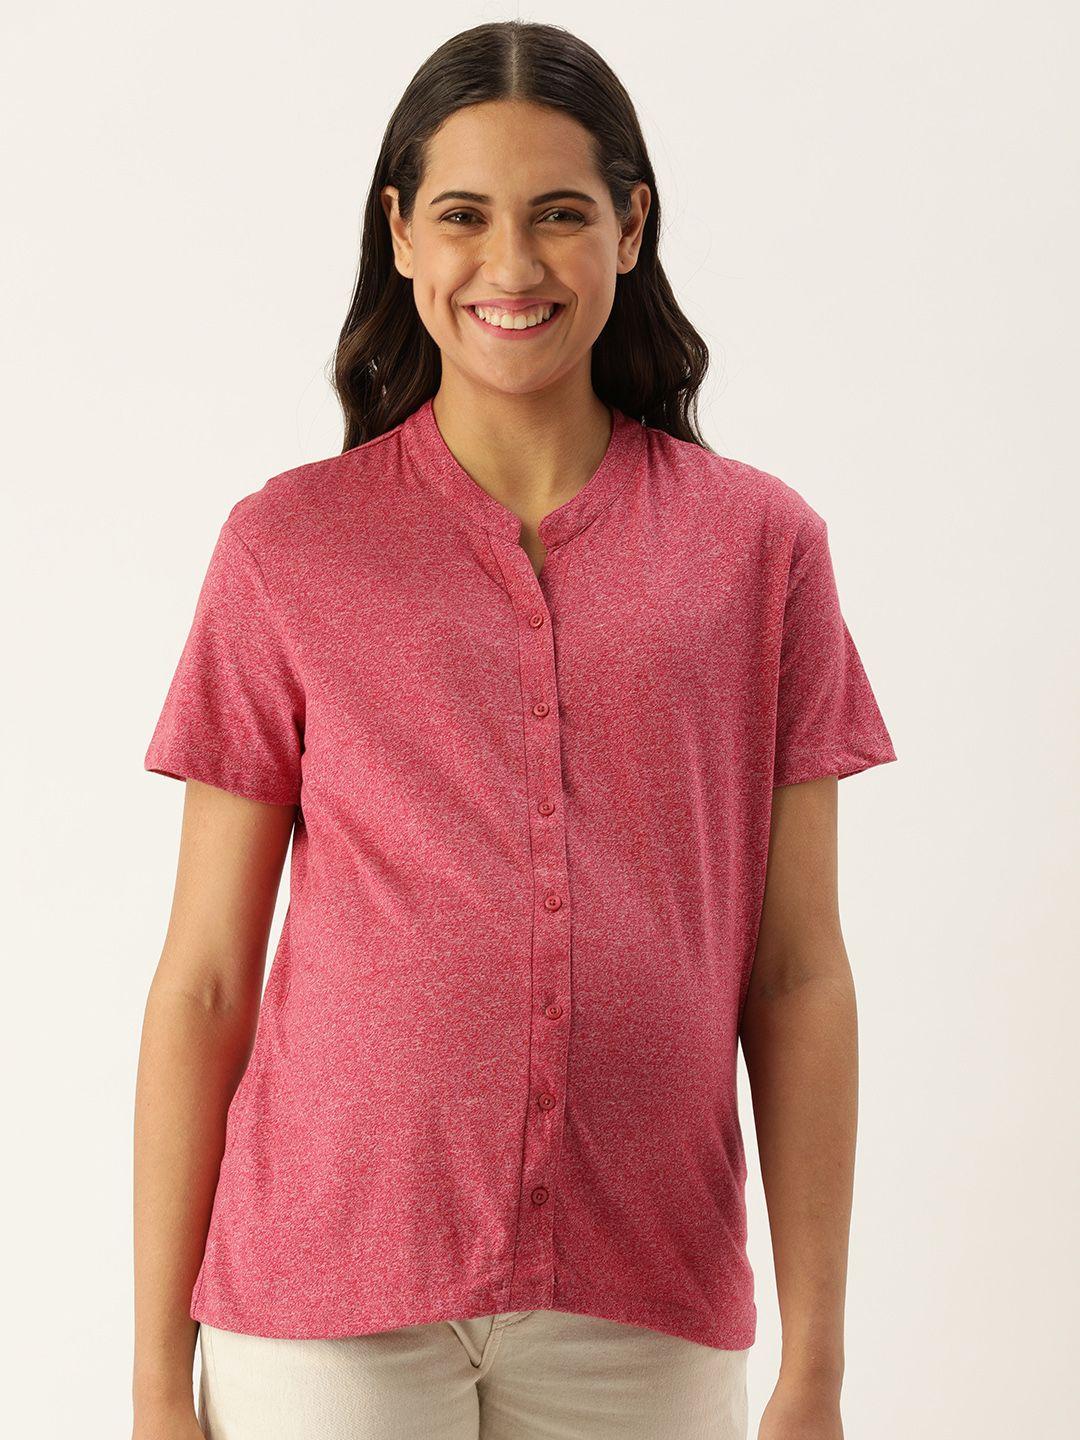 nejo-dusty-pink-round-neck-pure-cotton-top